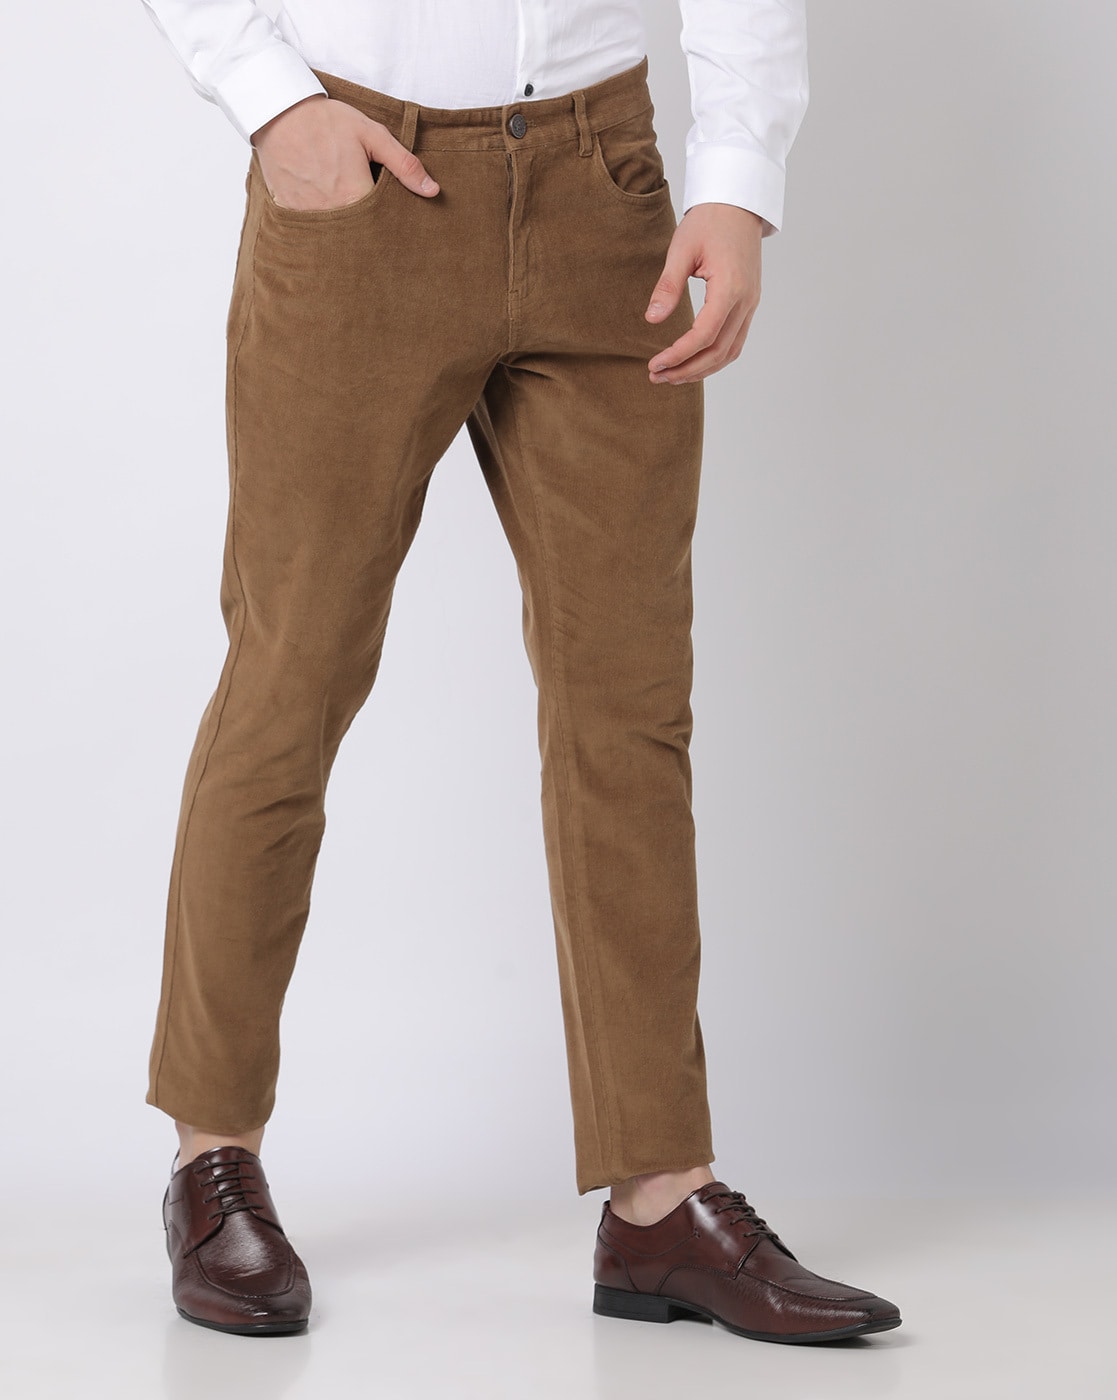 PT01 Slim Fit Pleated Corduroy Trousers Taupe at CareOfCarl.com